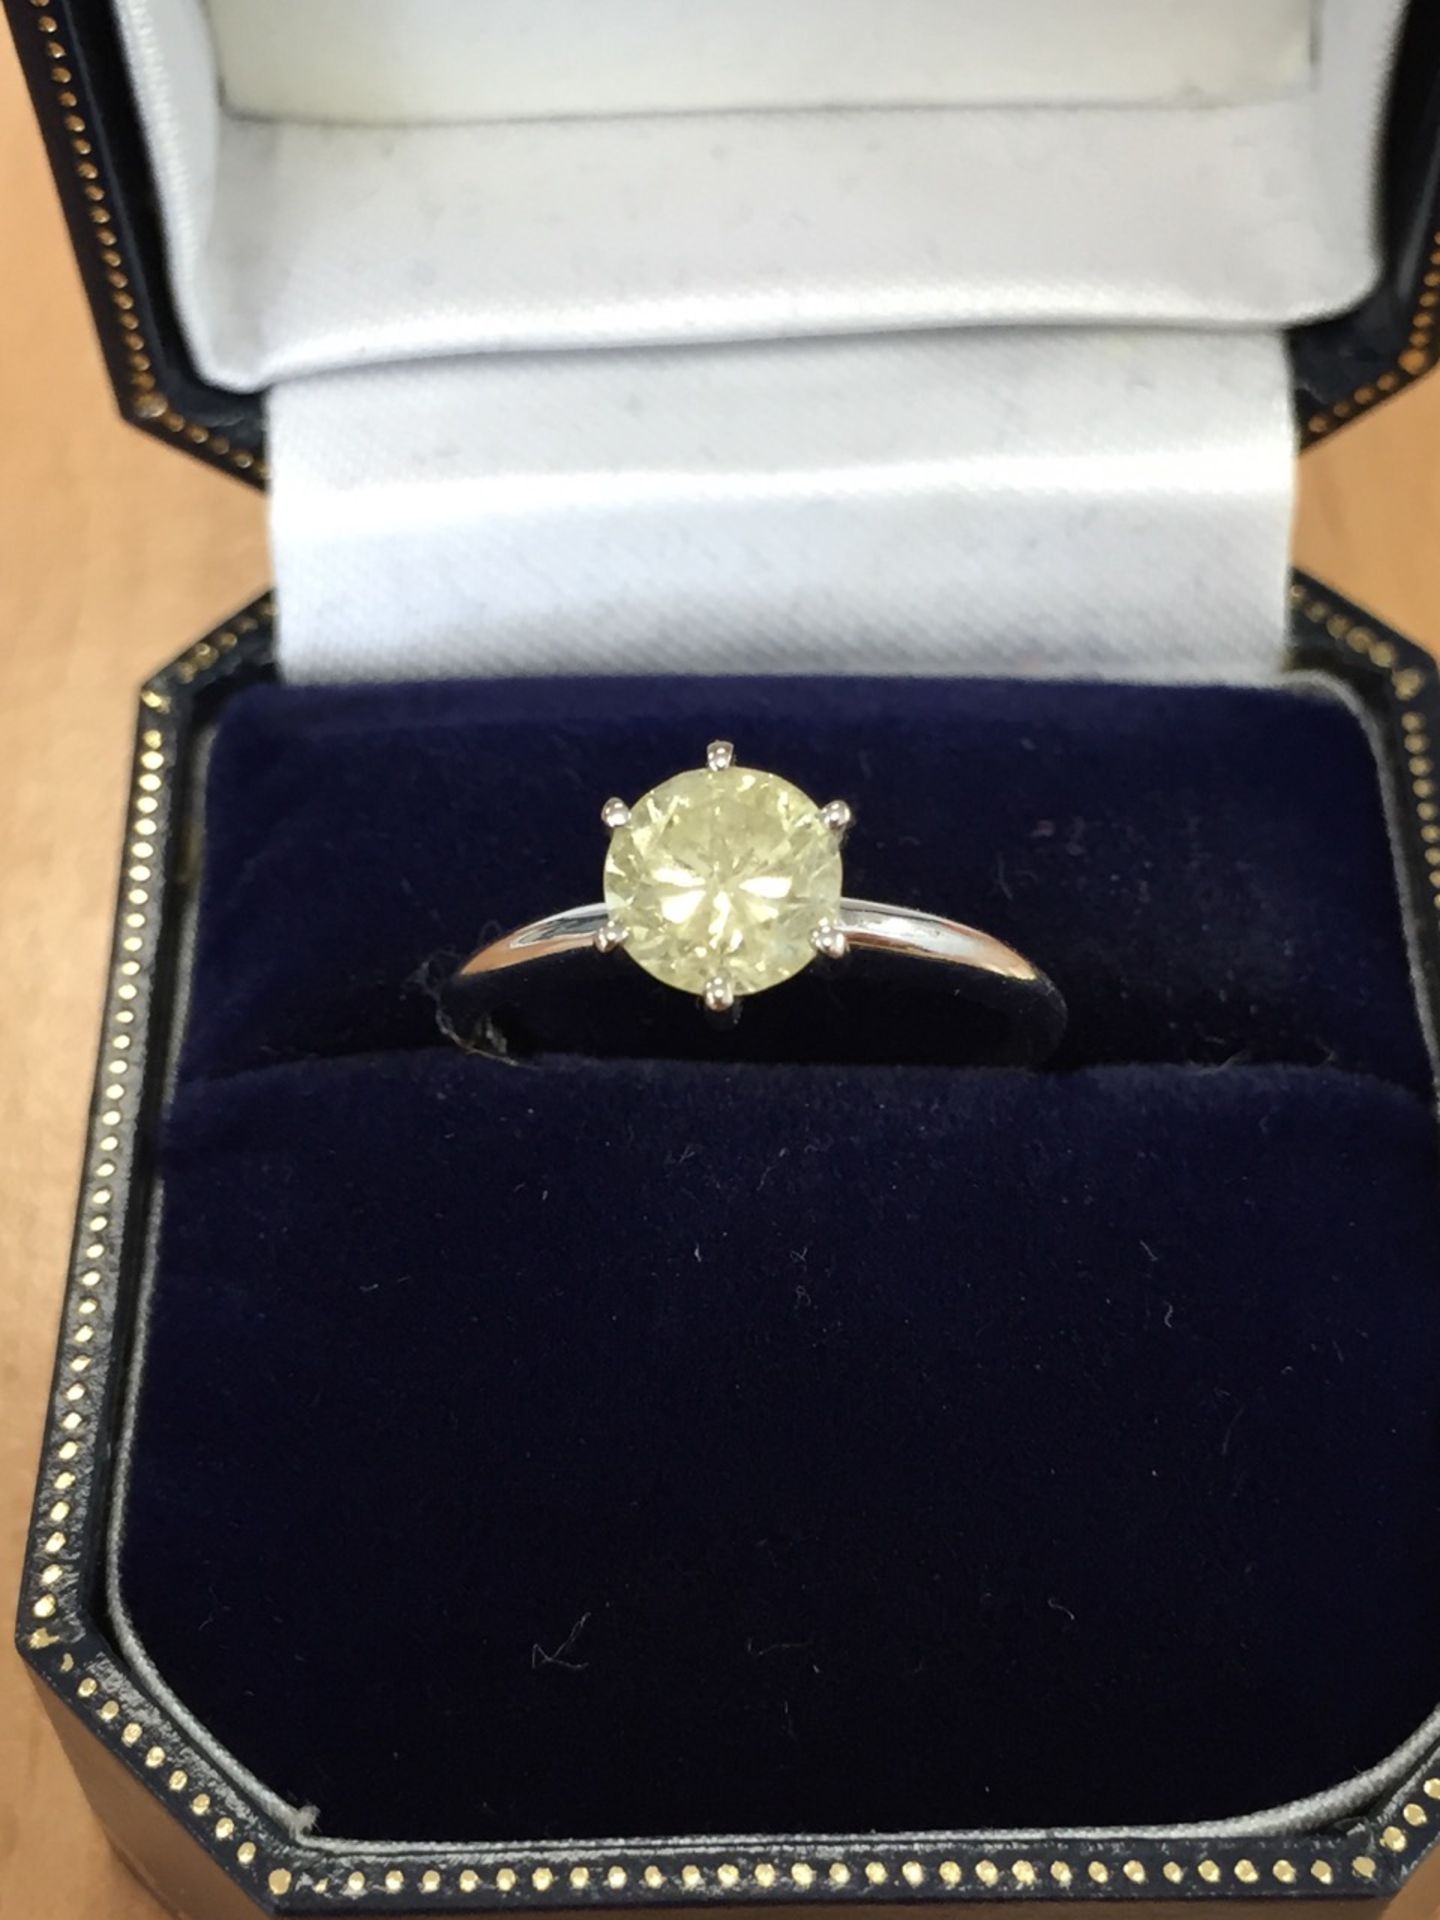 1.1 Carat Diamond - Solitaire Engagement Ring - Image 11 of 12